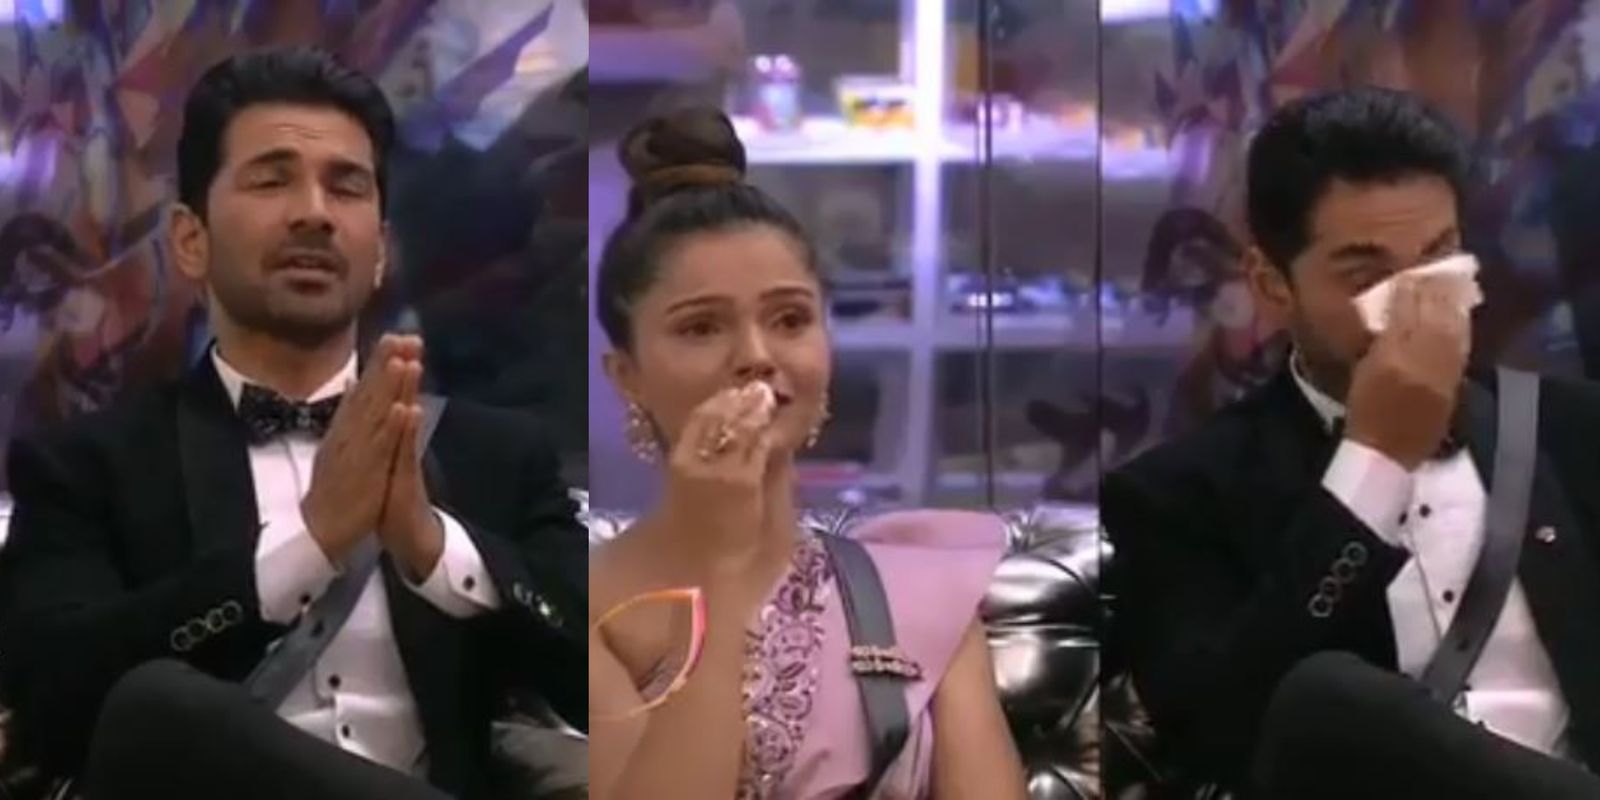 Bigg Boss 14 Promo: Abhinav Is In Tears After Salman Says He's Gaining From Rakhi's 'Entertainment', Wants To Go Home